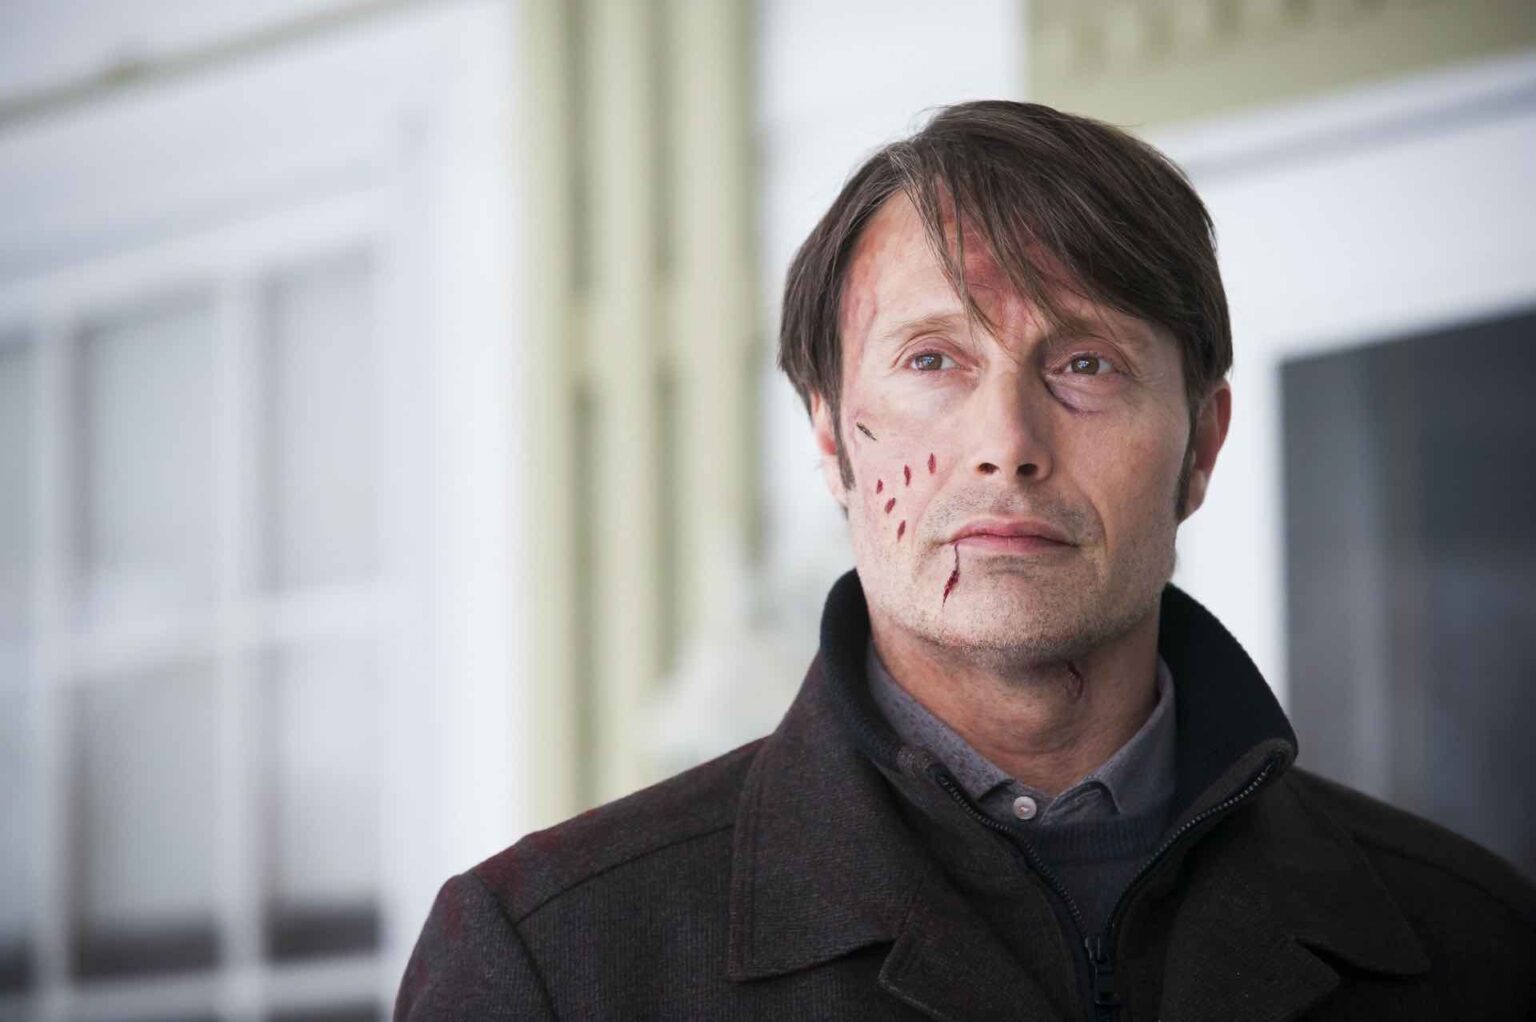 Bryan Fuller isn’t the only person lobbying for 'Hannibal' to return. Will Amazon pick up 'Hannibal' for season 4? Let's find out.